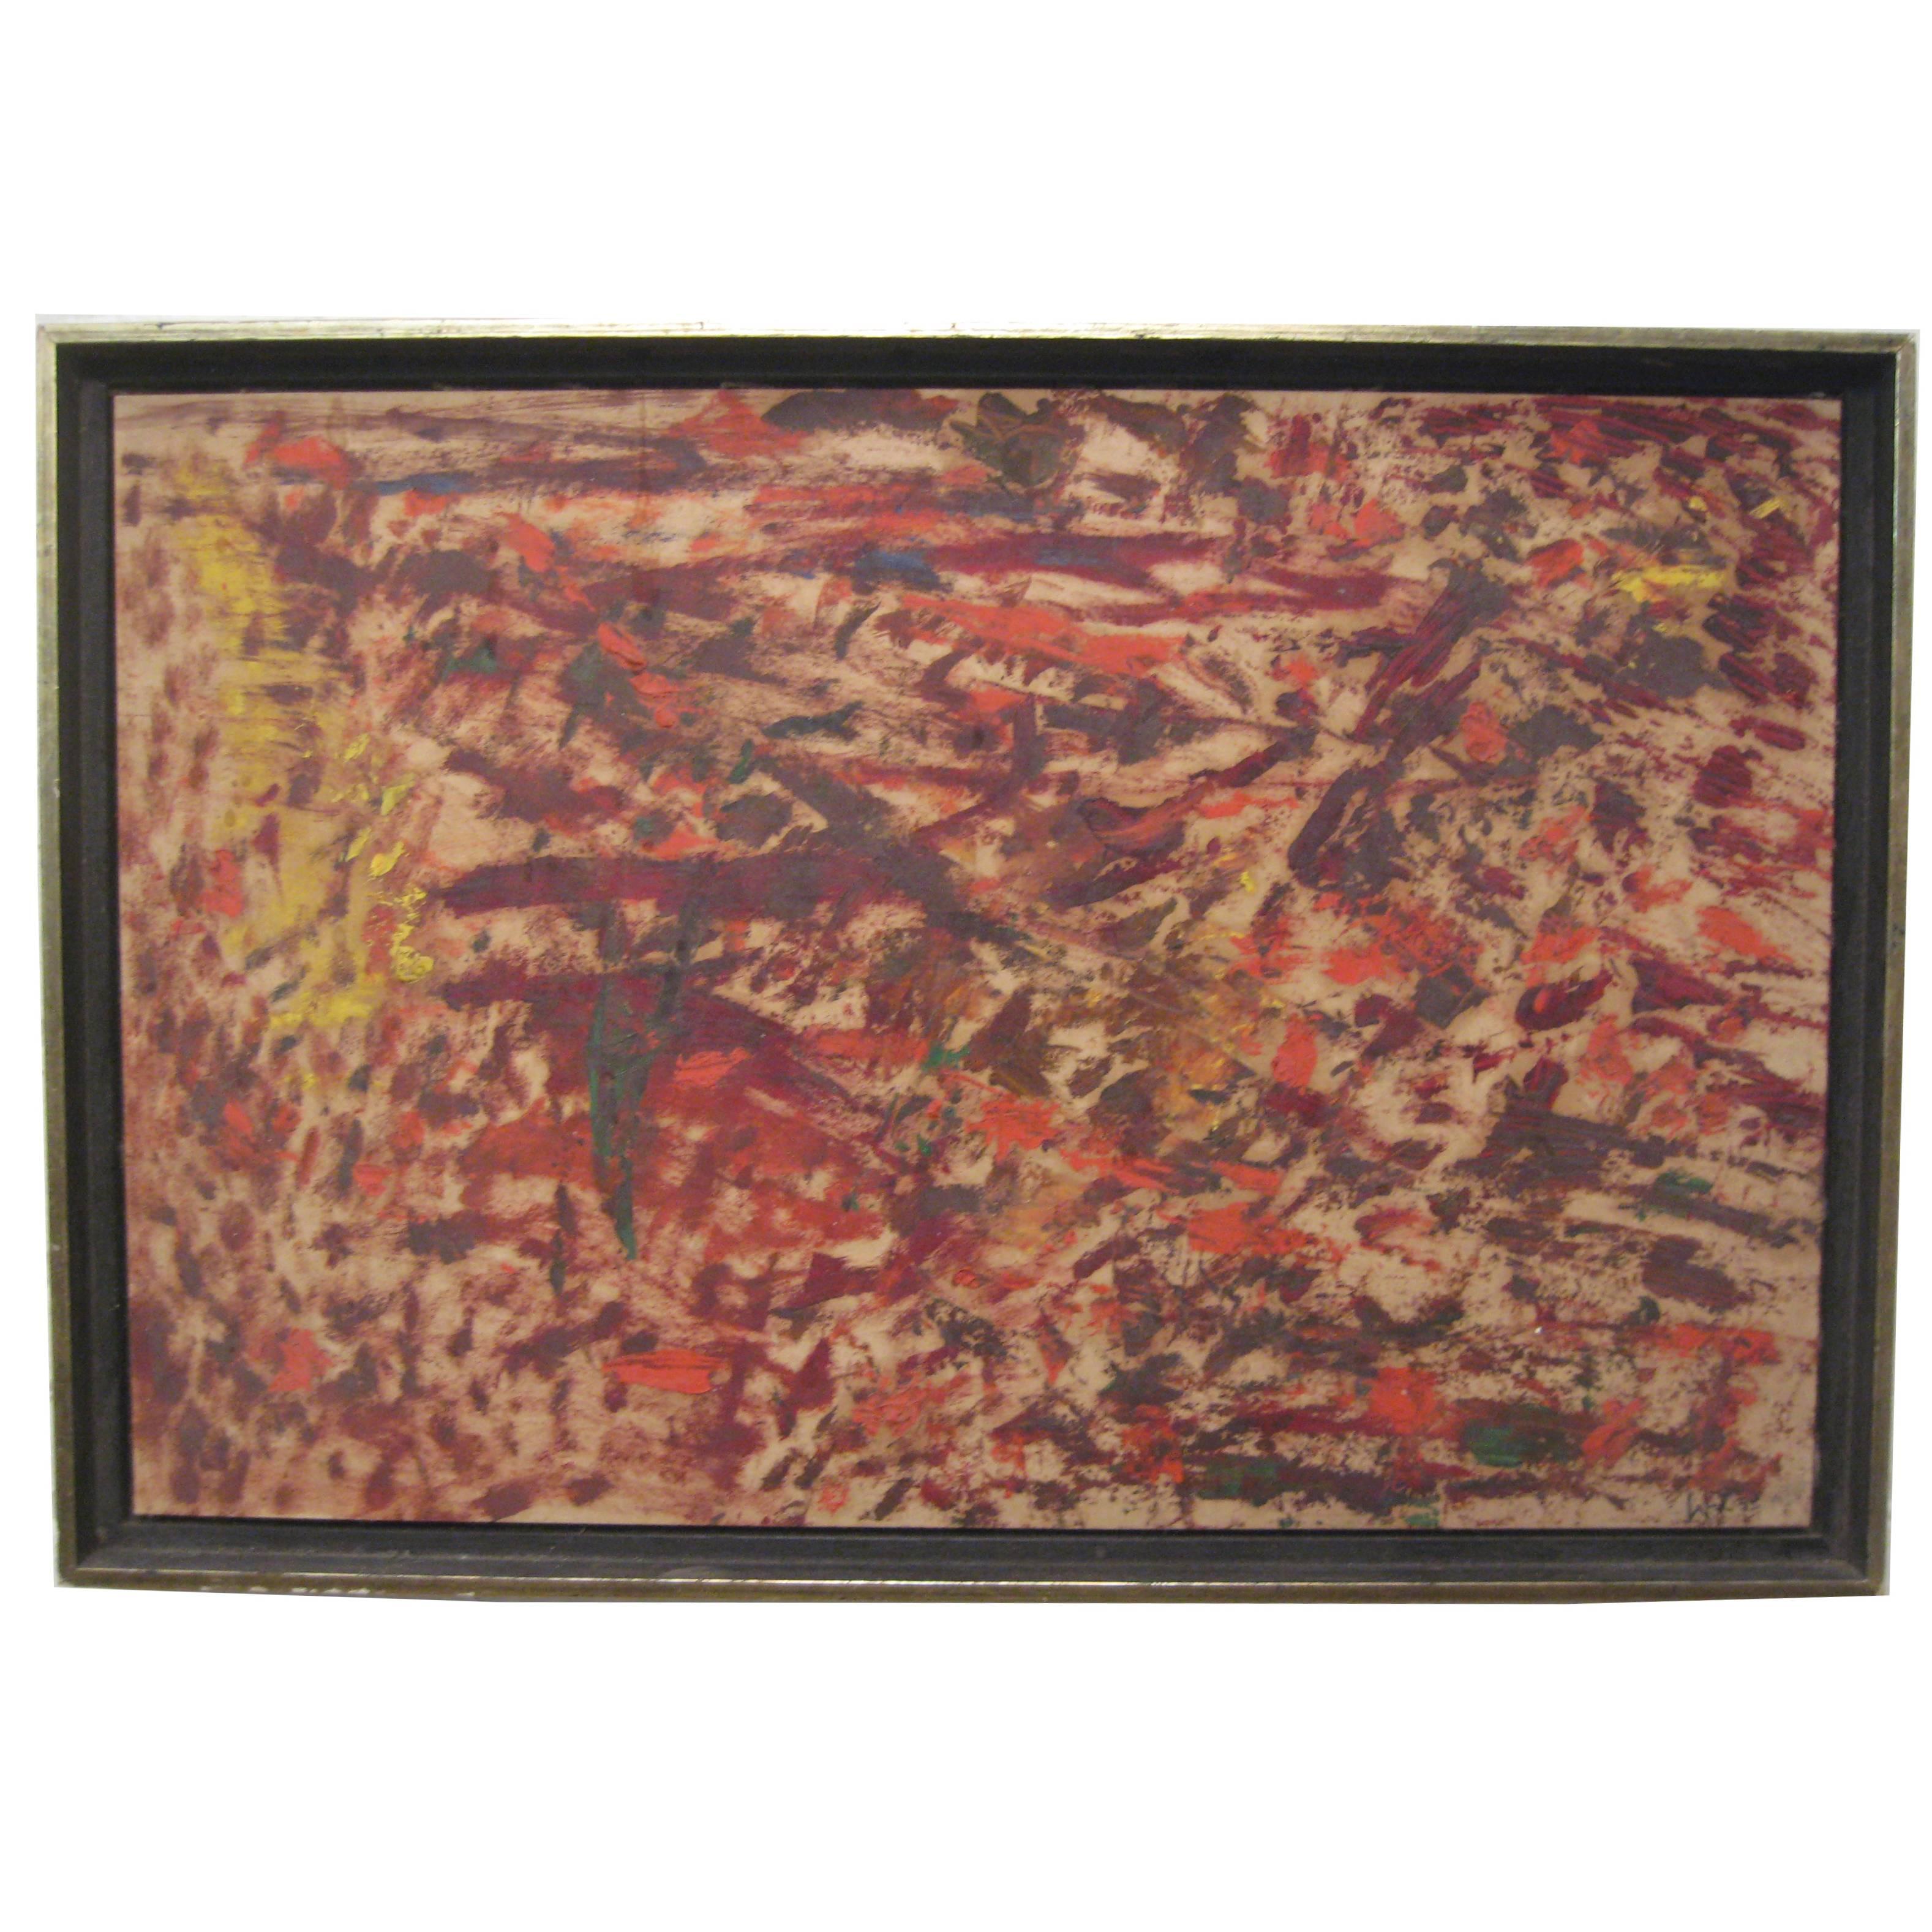 Wigs Frank 1965 Abstract Expressionist Painting